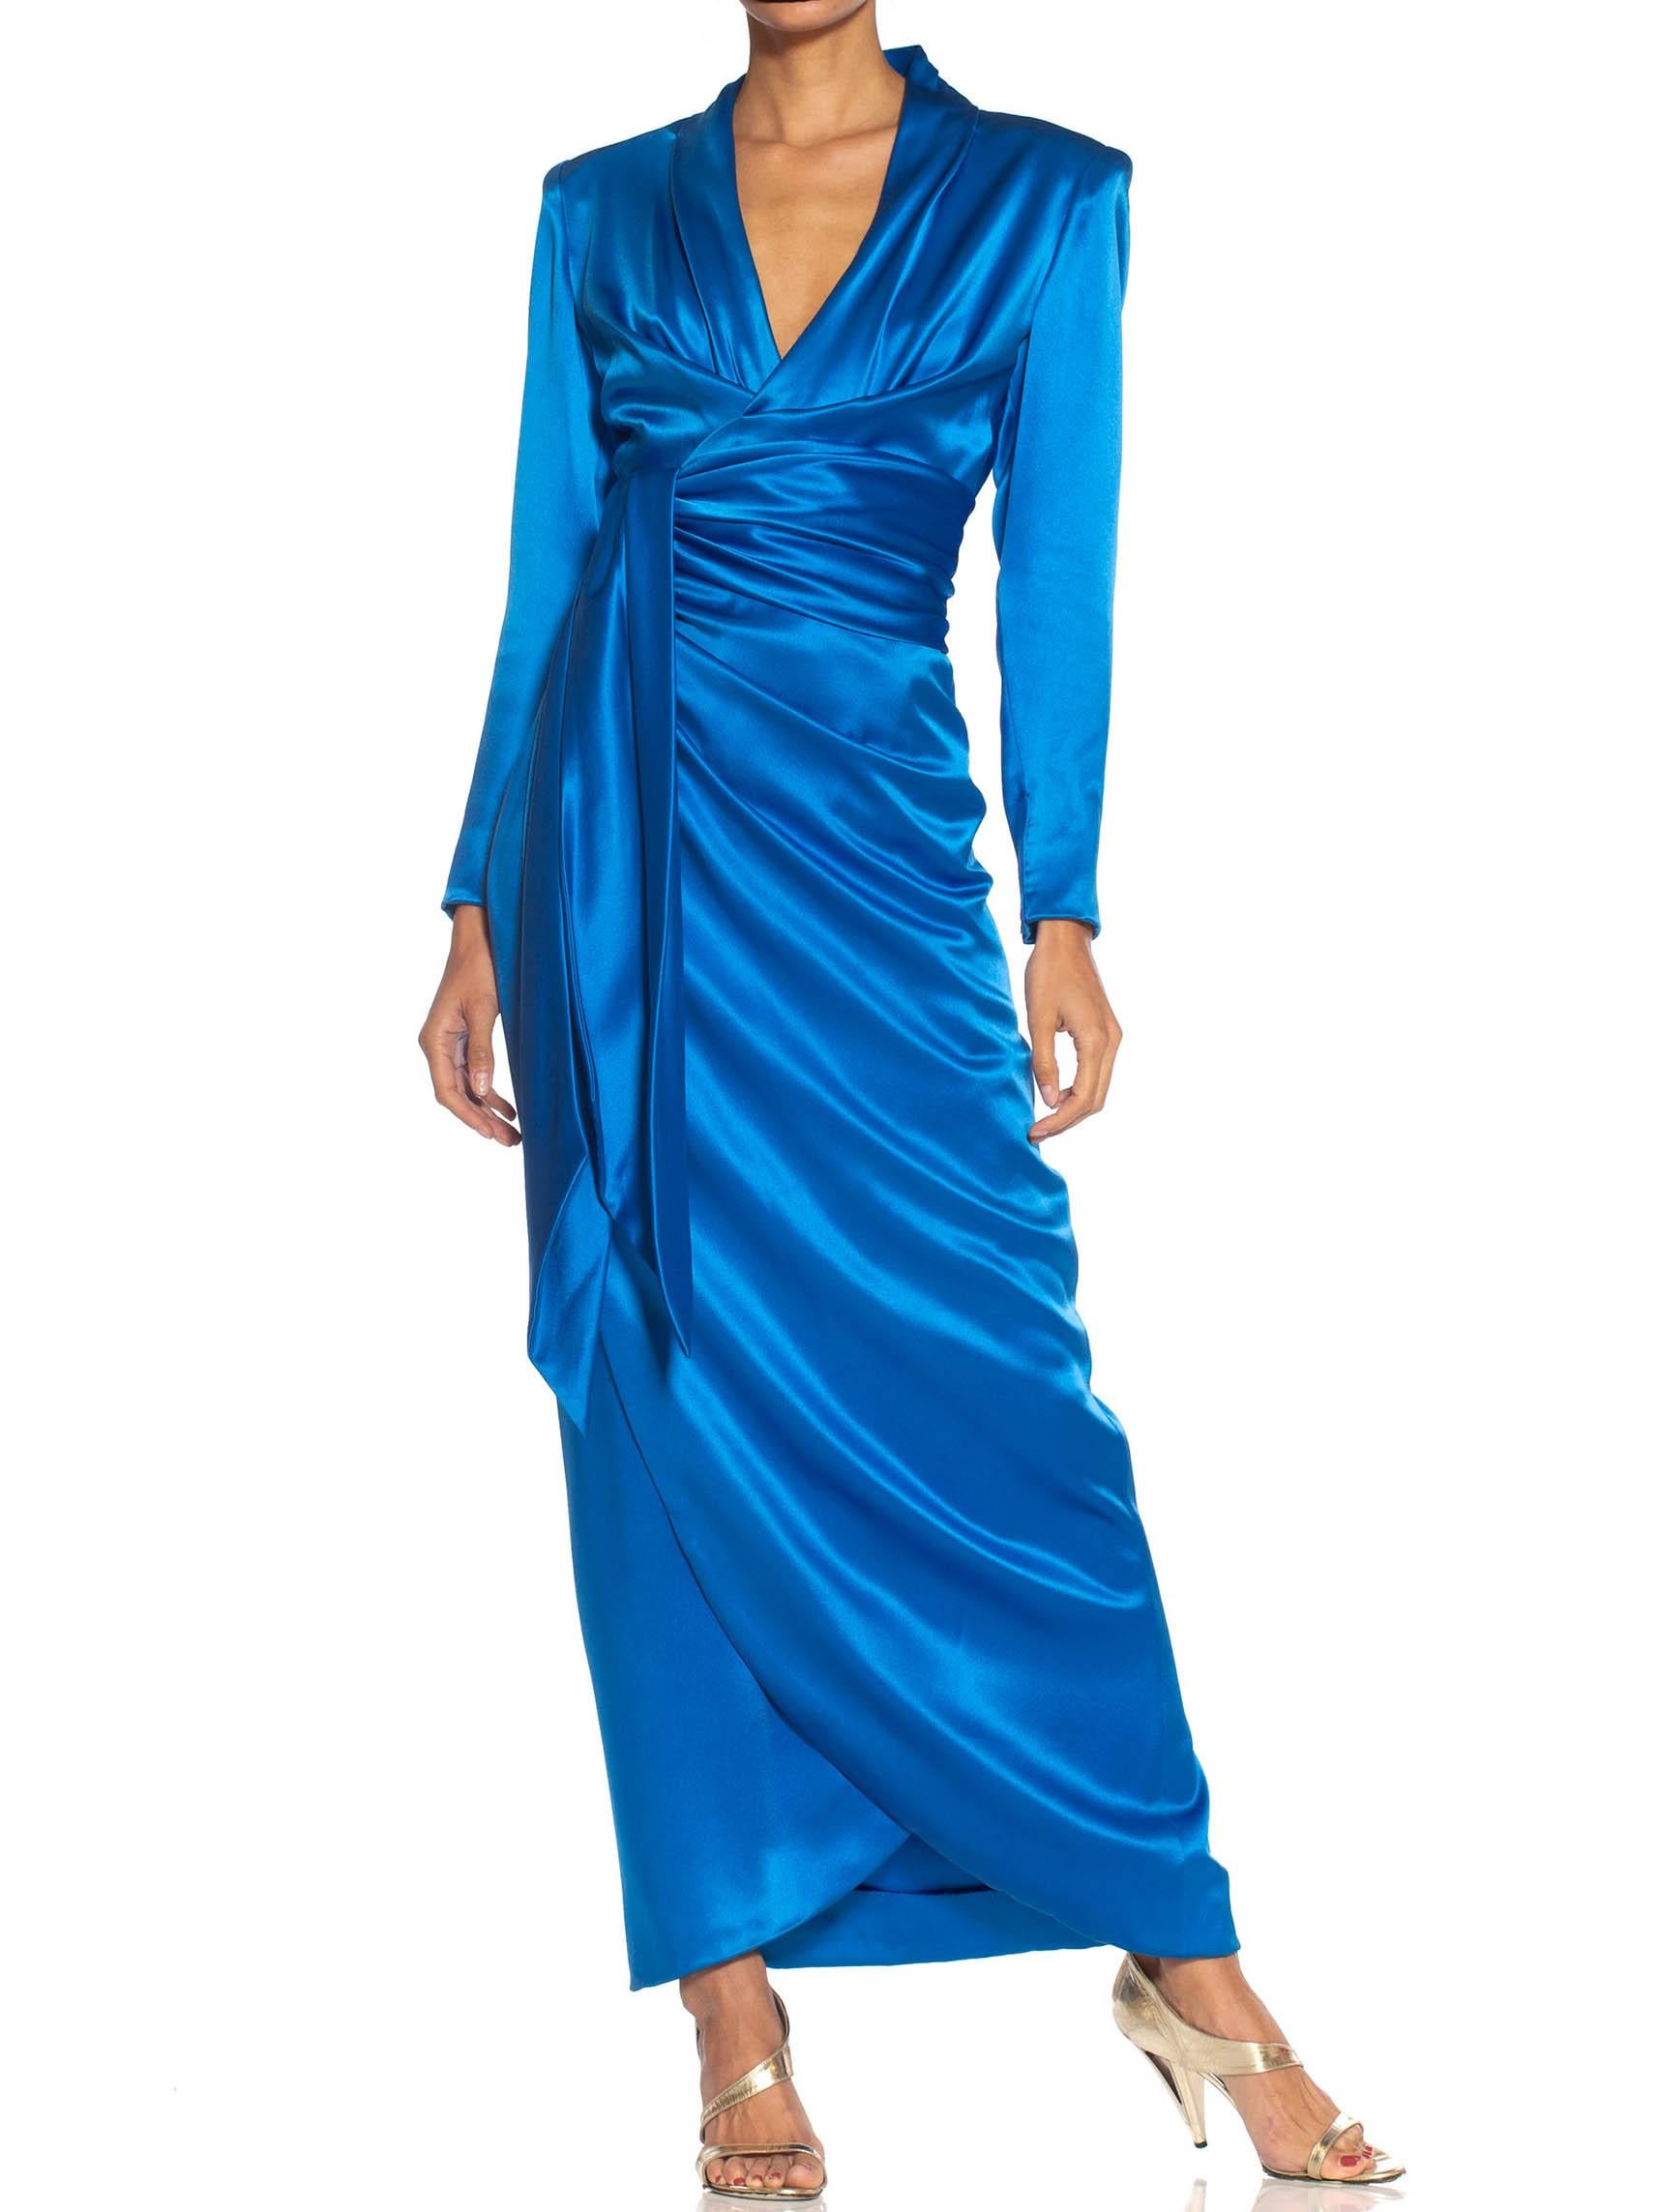 in near perfect condition, few very slight areas of abrasion to the satin. 1980S GIVENCHY Electric Blue Haute Couture Silk Double Faced Satin Sleeved Gown With Slit & Sash 